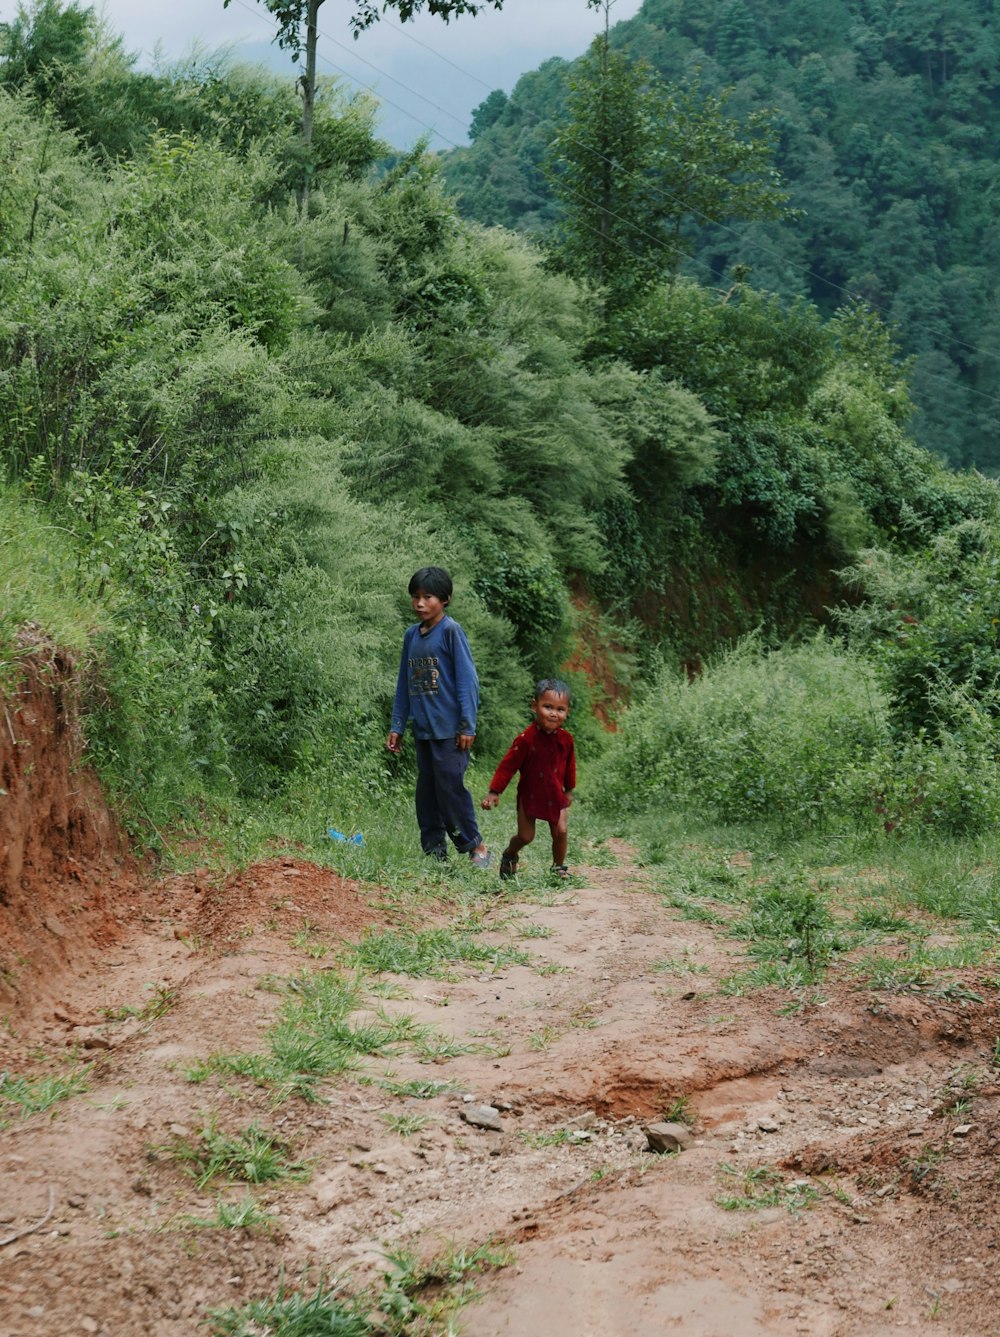 a man and a boy walking on a dirt path in the woods